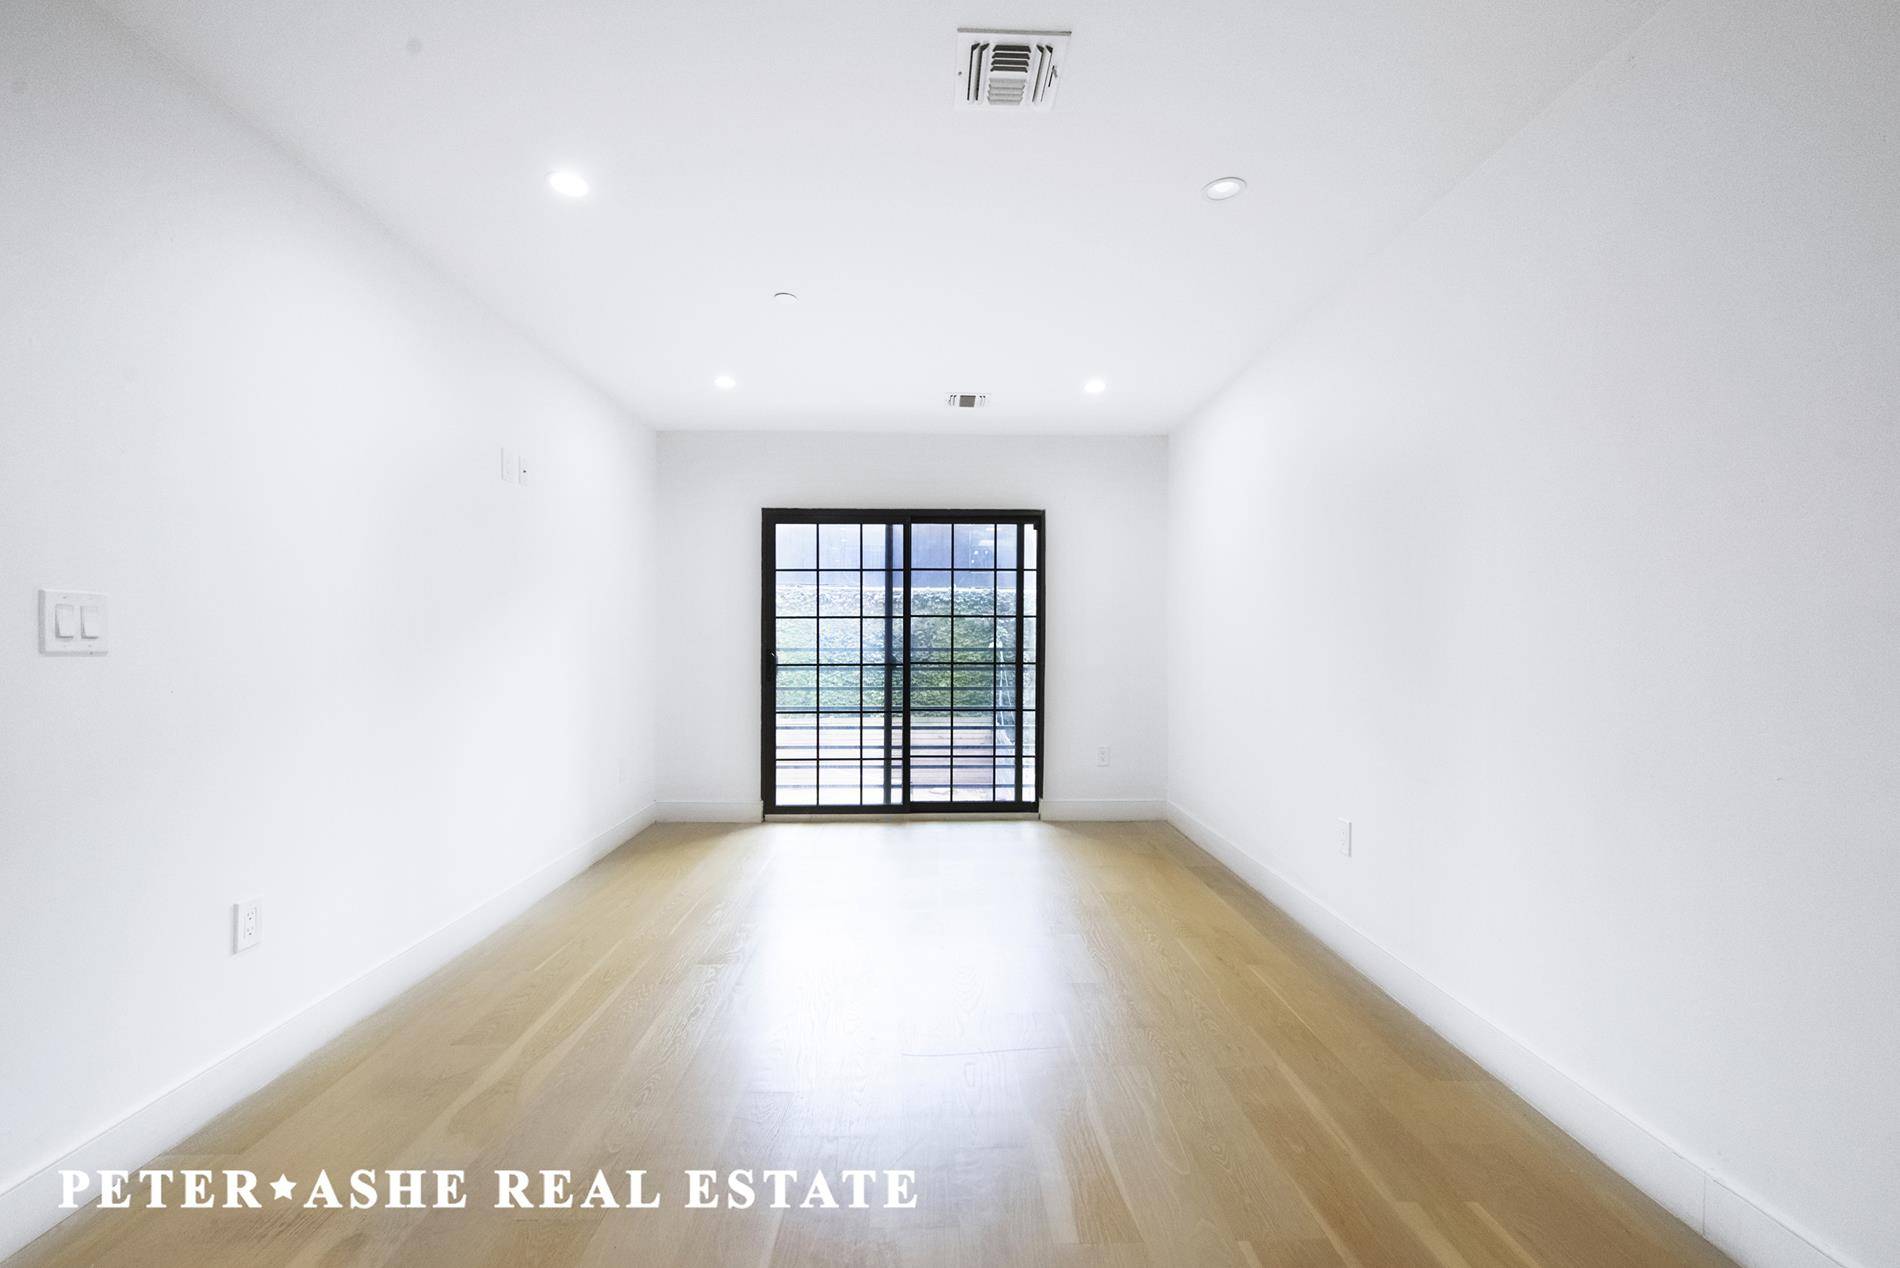 800 Park Place is a newly built eight unit boutique building condominium located in the heart of Crown Heights.